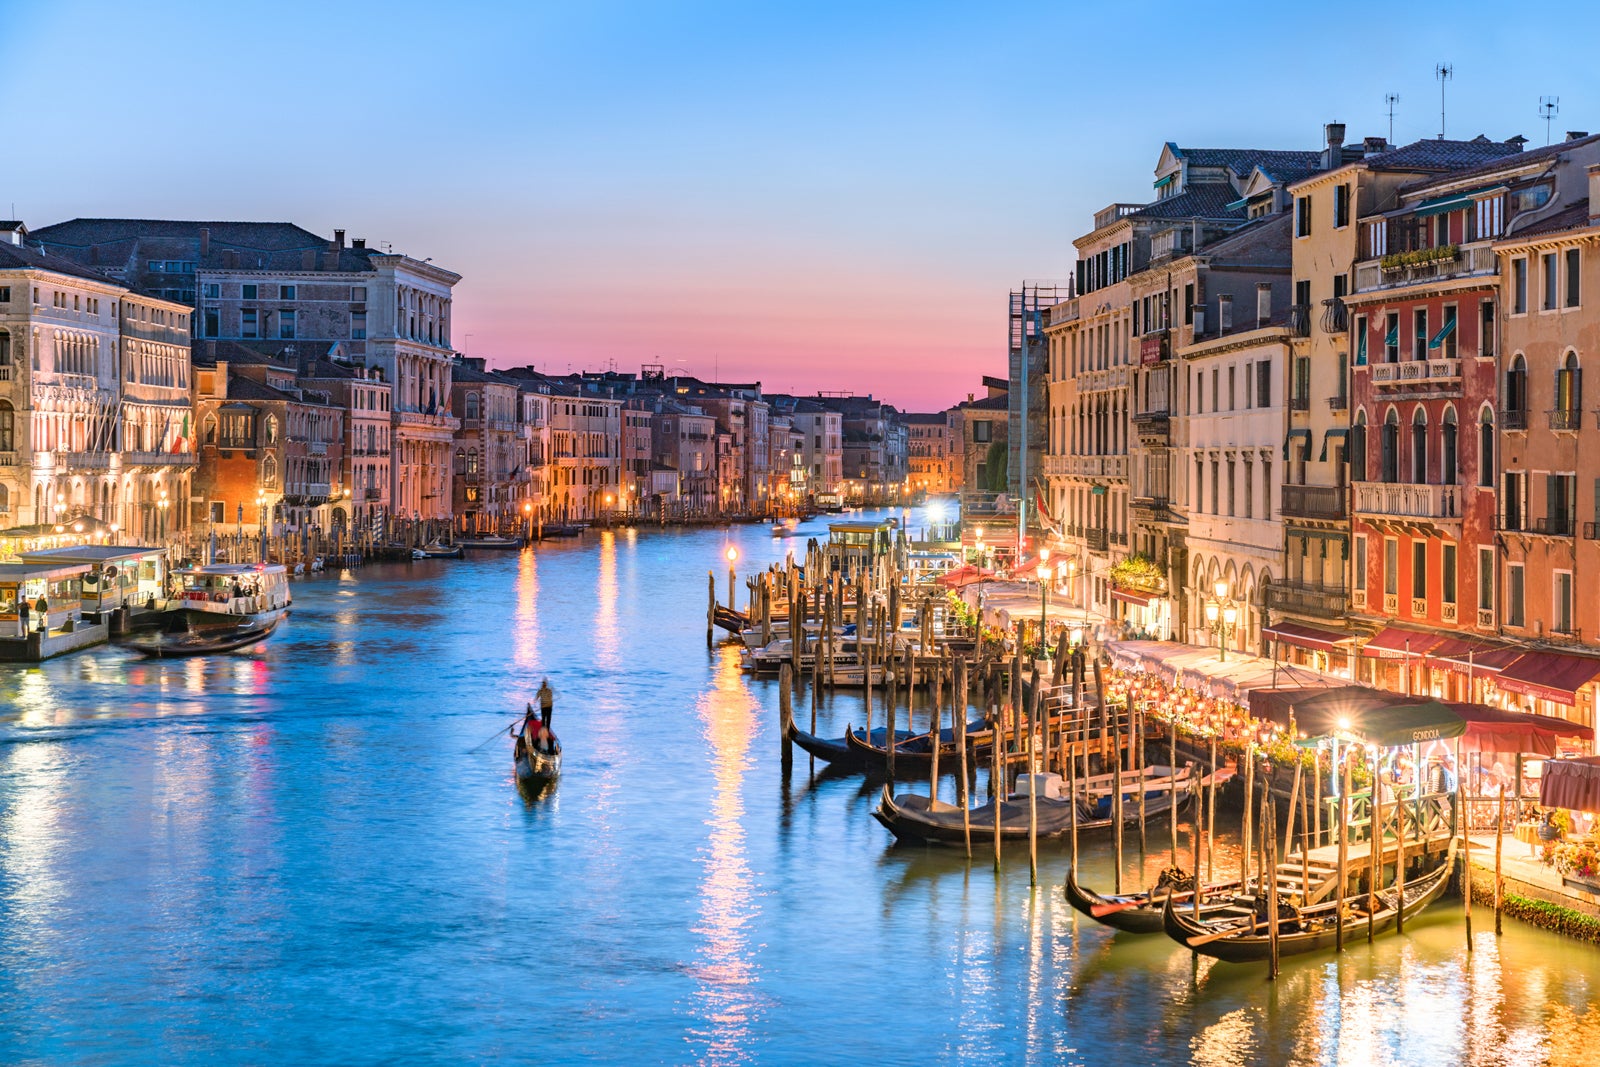 Fly business class this summer to Italy, Spain and Austria from $2,740 round-trip